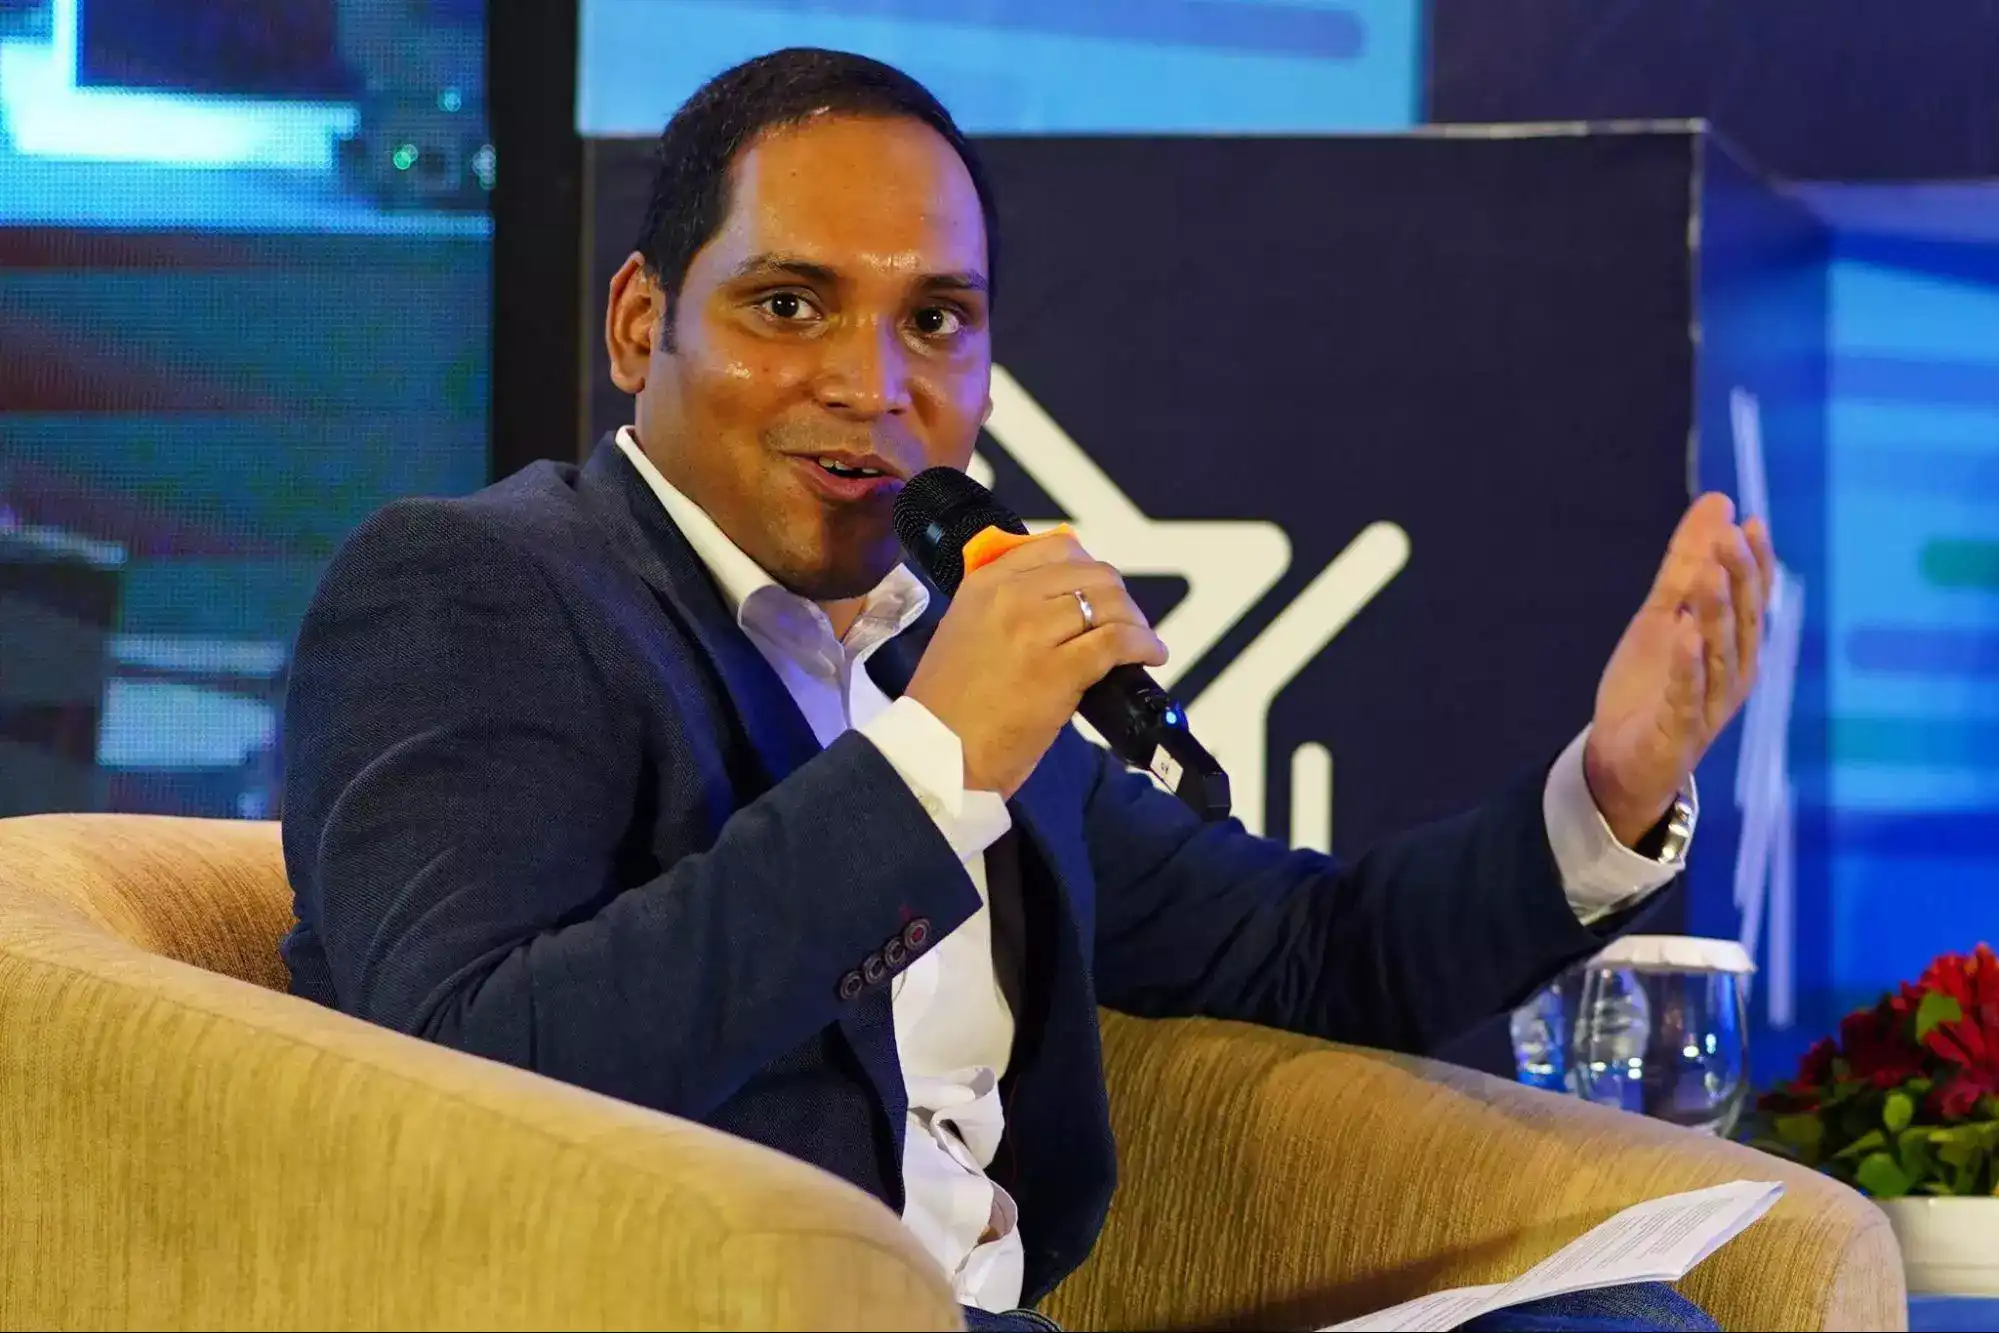 Bijon Islam, CEO and Co-Founder of LightCastle Partners, moderated the panel through thought provoking questions.